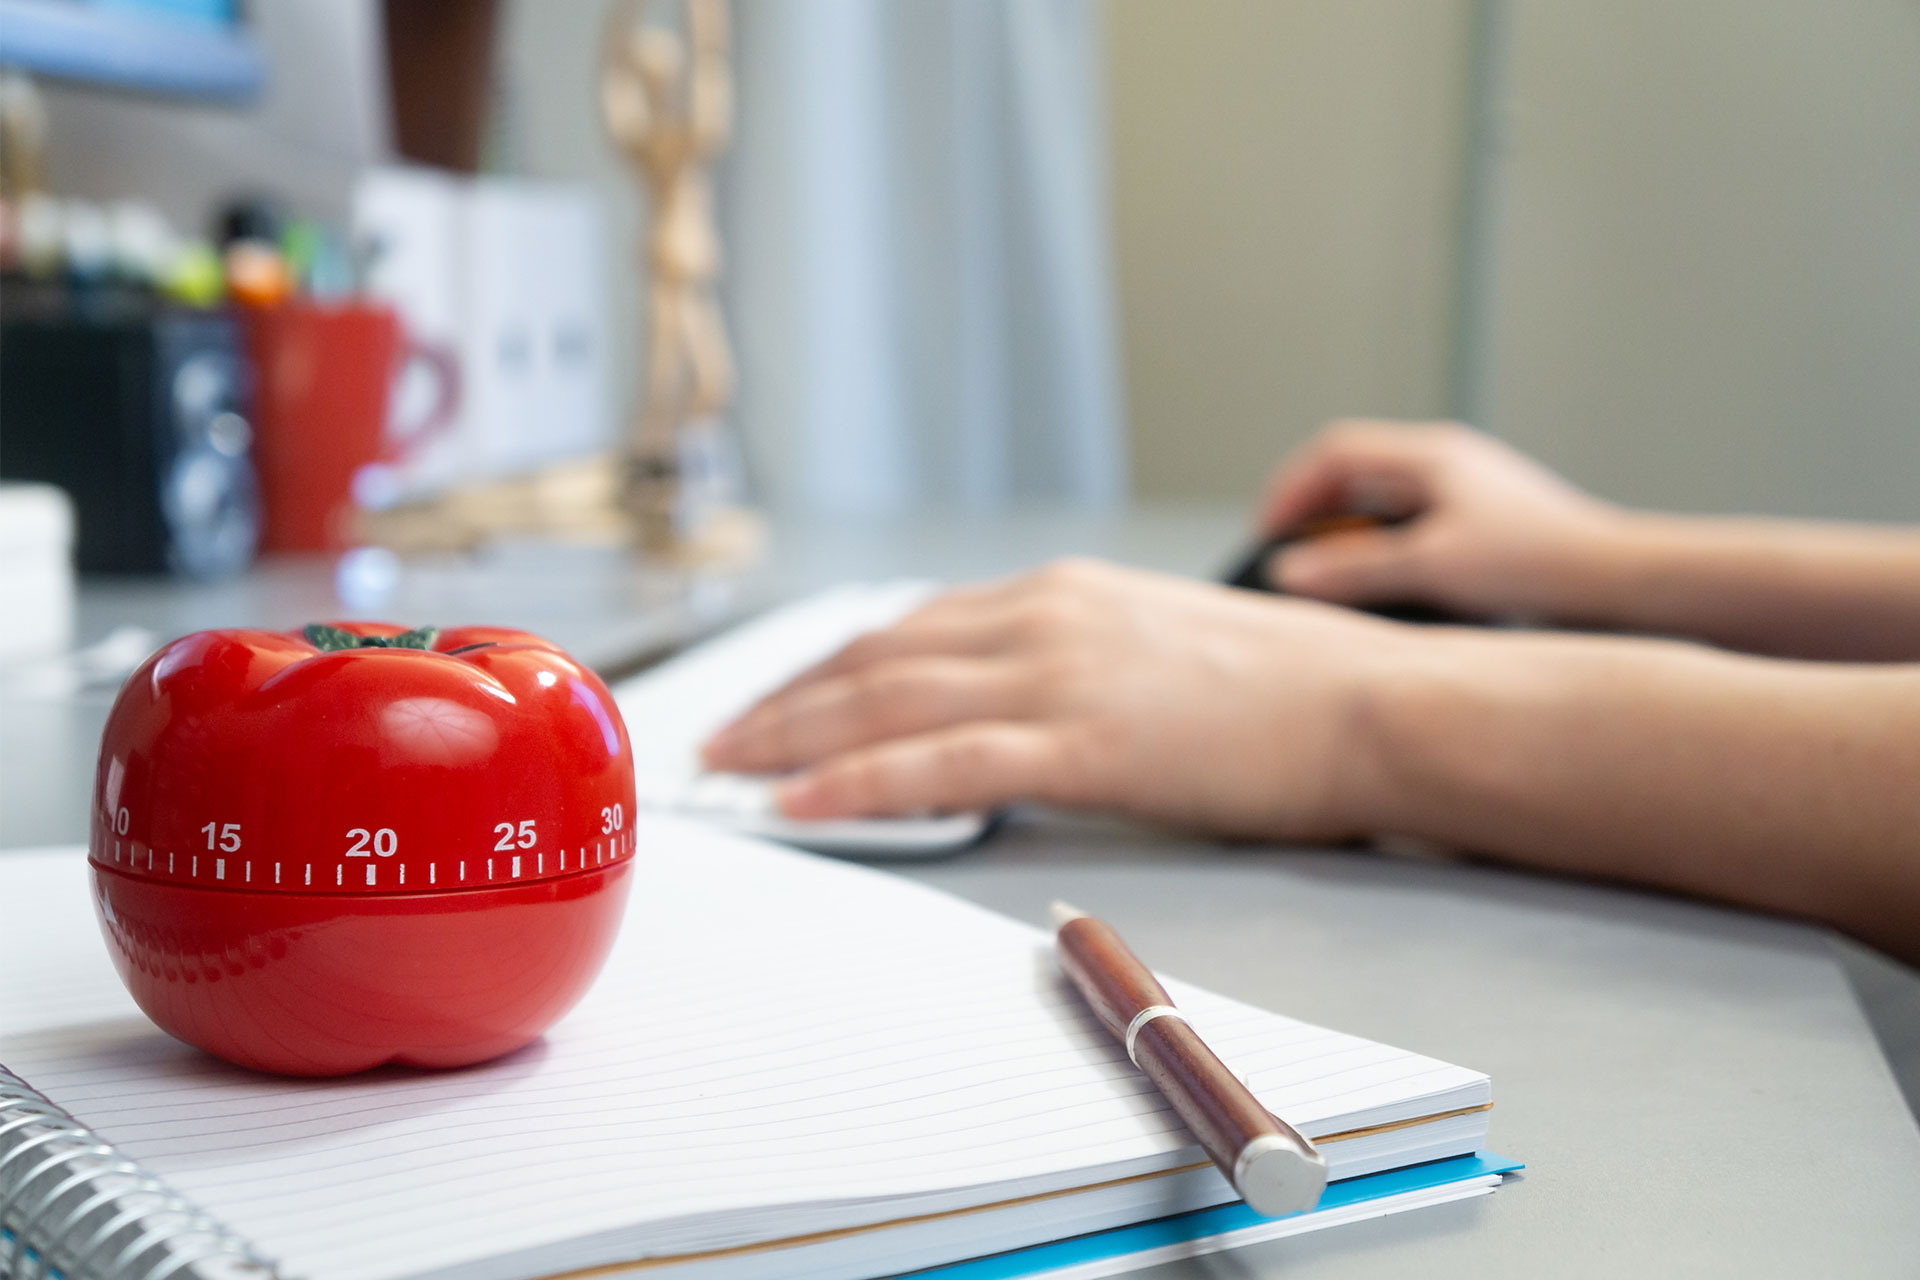 A person working on a task has a Pomodoro timer set on their desk